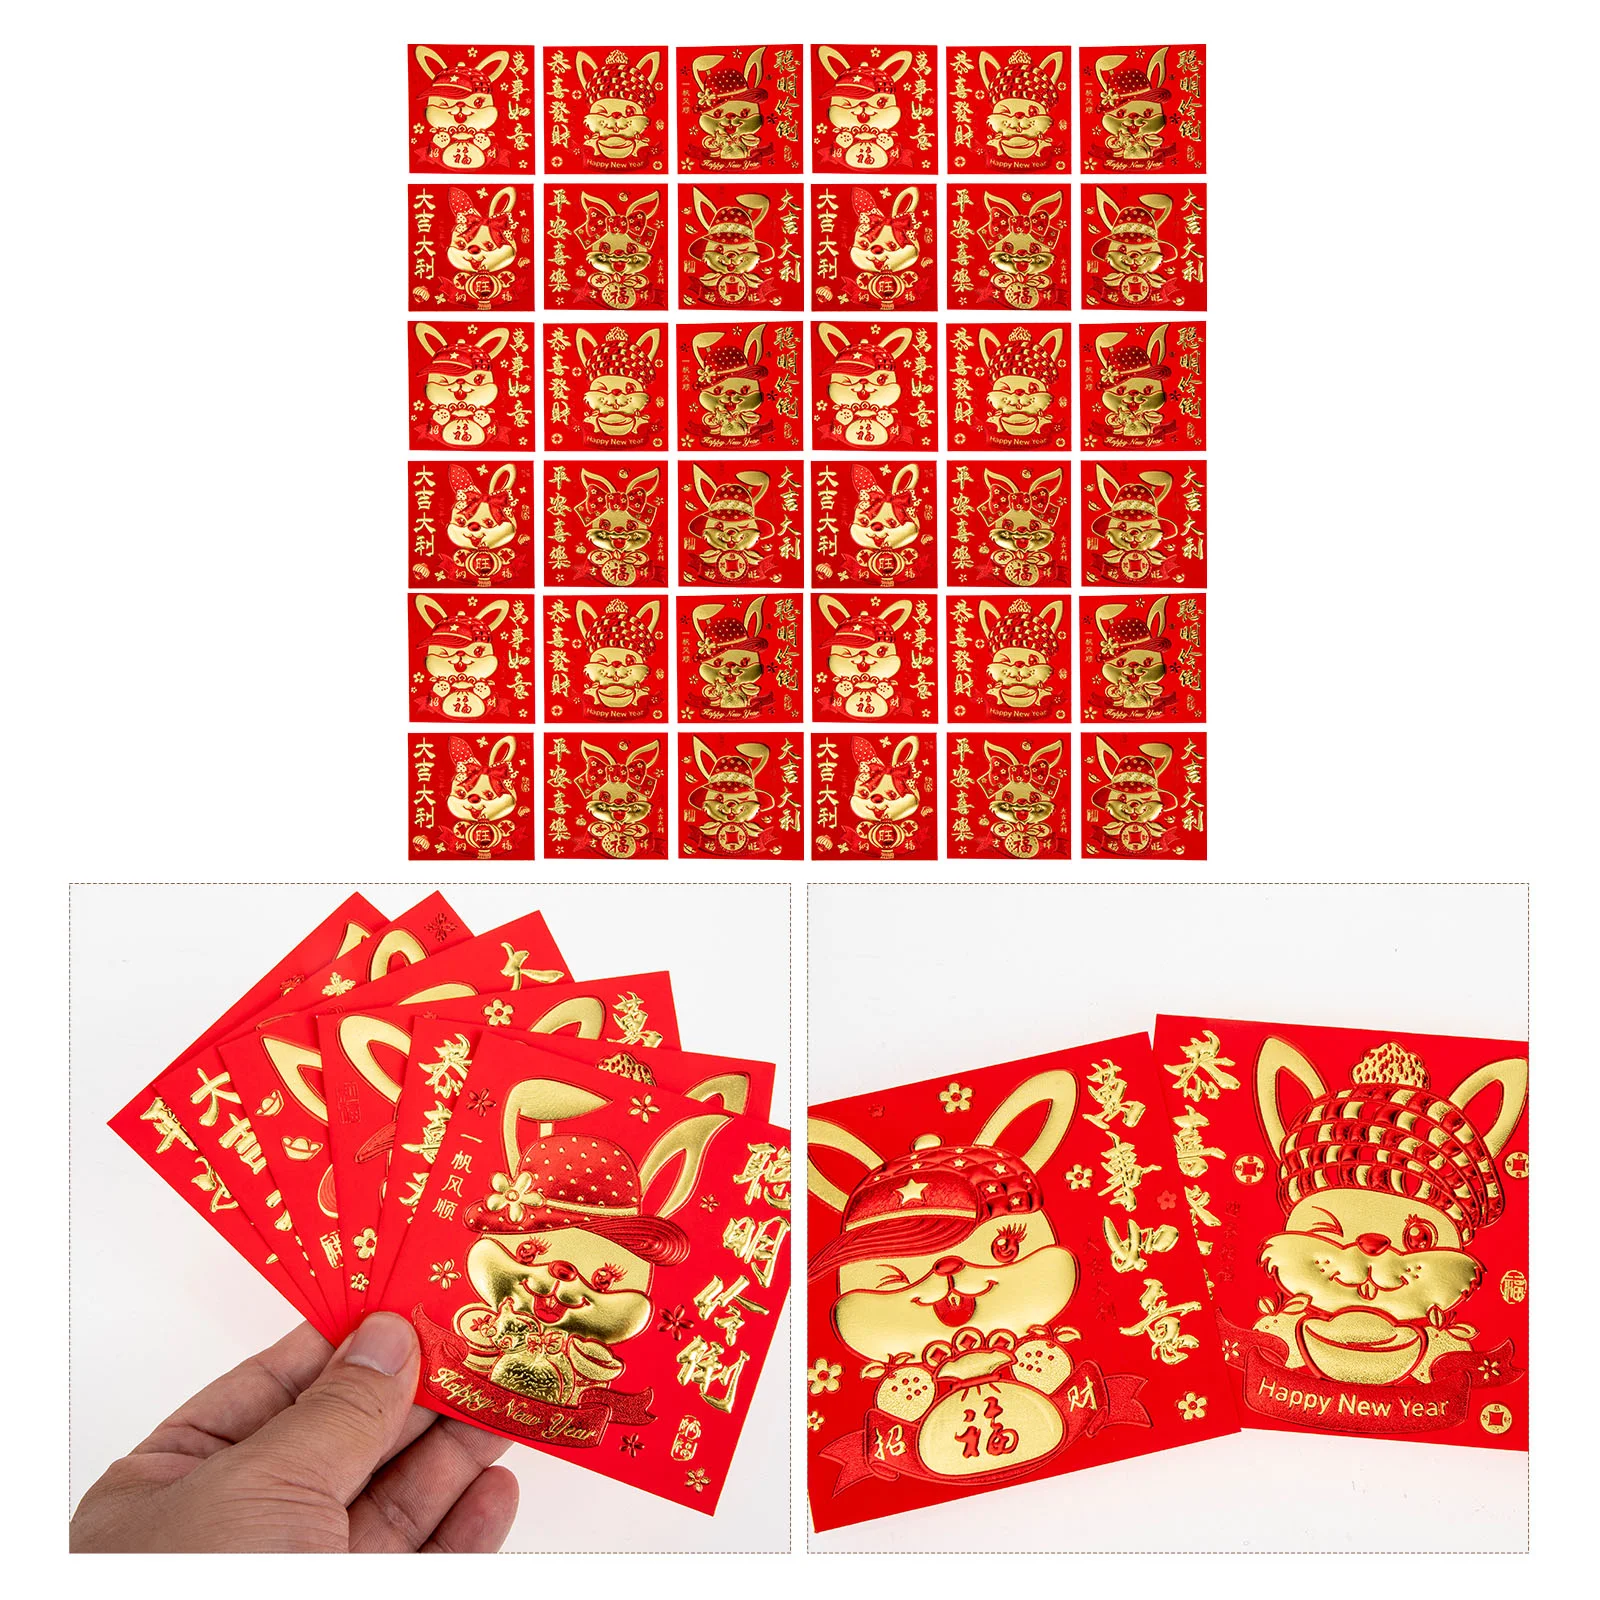 

Red Envelopes Money Year Chinese New Packet Envelope Packets Rabbit Zodiac Festival Spring Lucky Hong Bao Lunar Pocket Cash